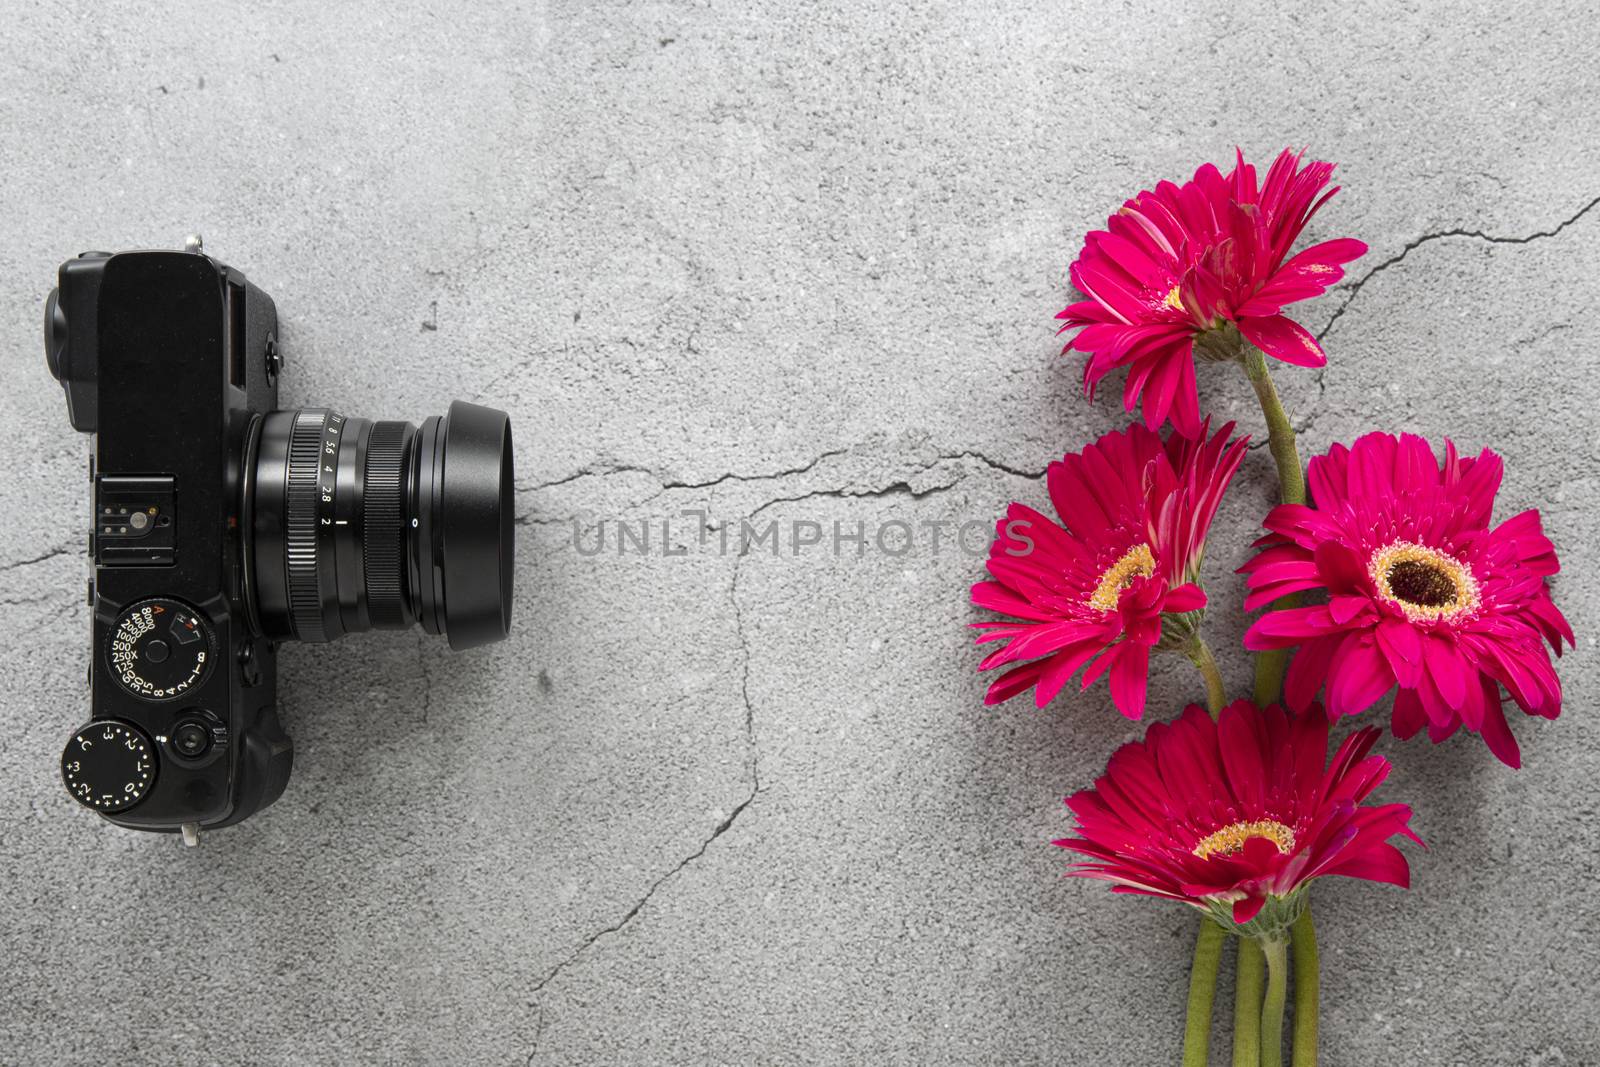 A camera and red flowers by Nawoot